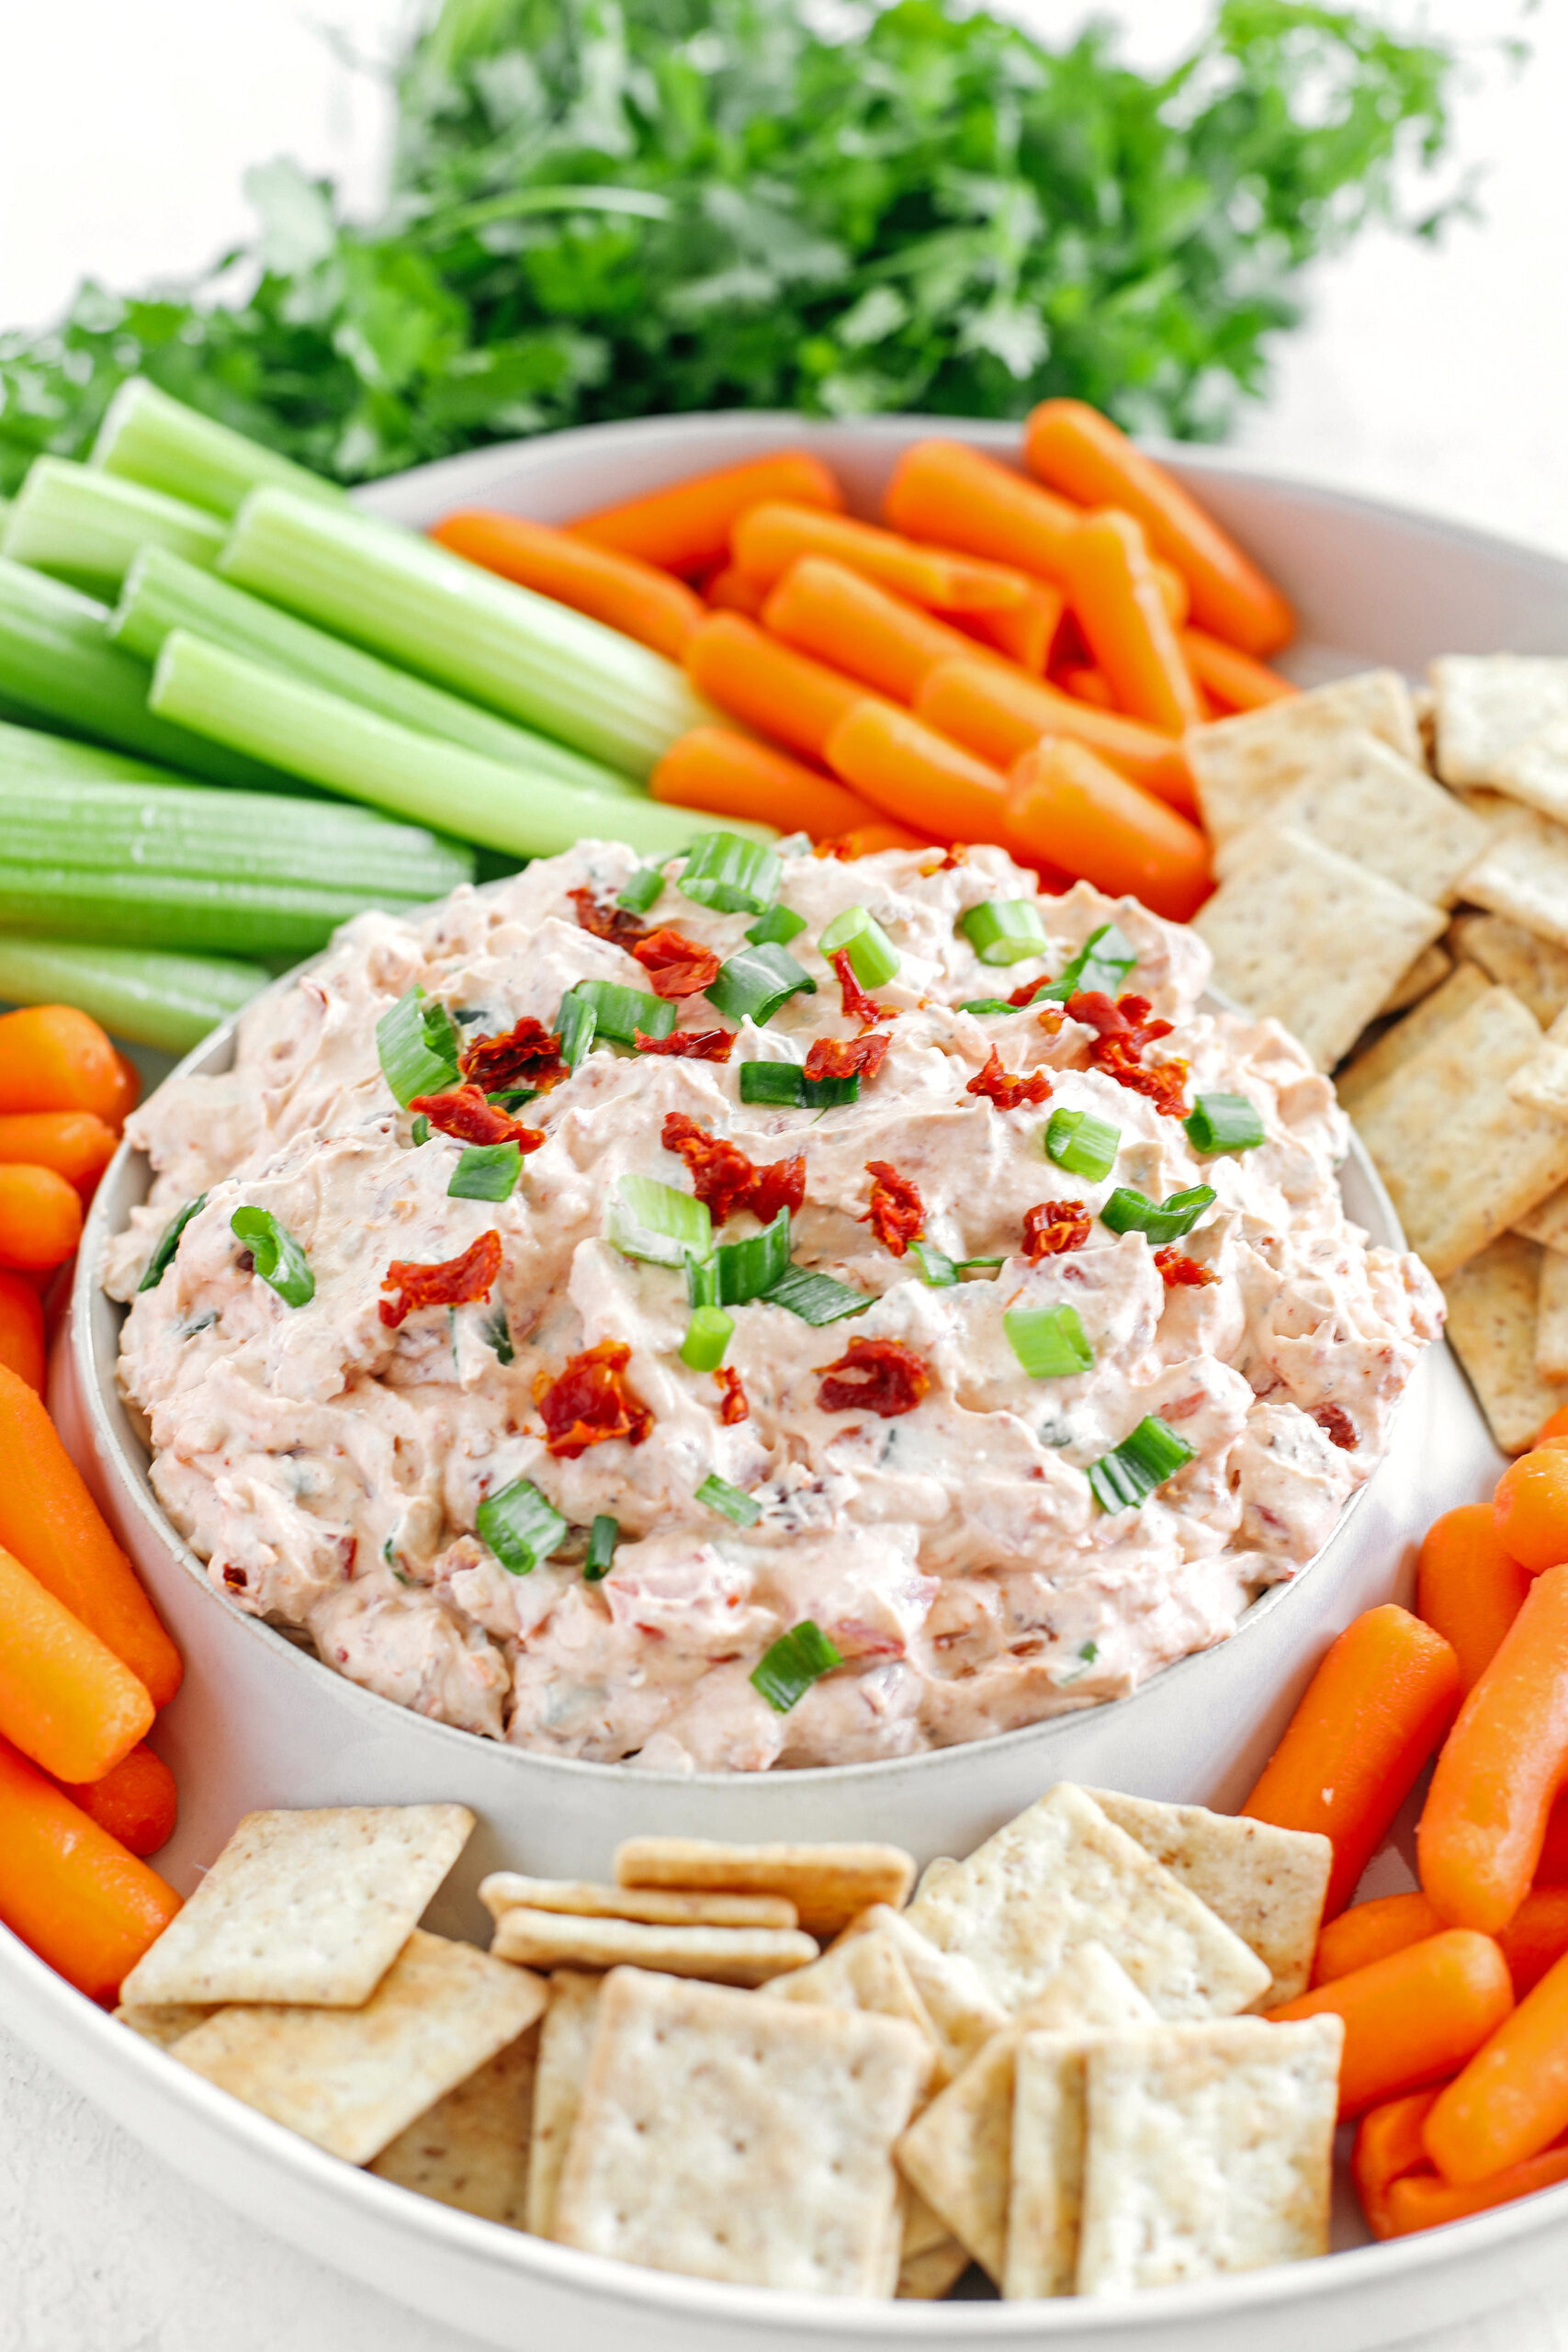 Creamy Sun Dried Tomato Dip made with a delicious mixture of cream cheese, Greek yogurt and chili sauce easily made in just minutes for the perfect appetizer!  Serve with an assortment of fresh veggies and crackers!